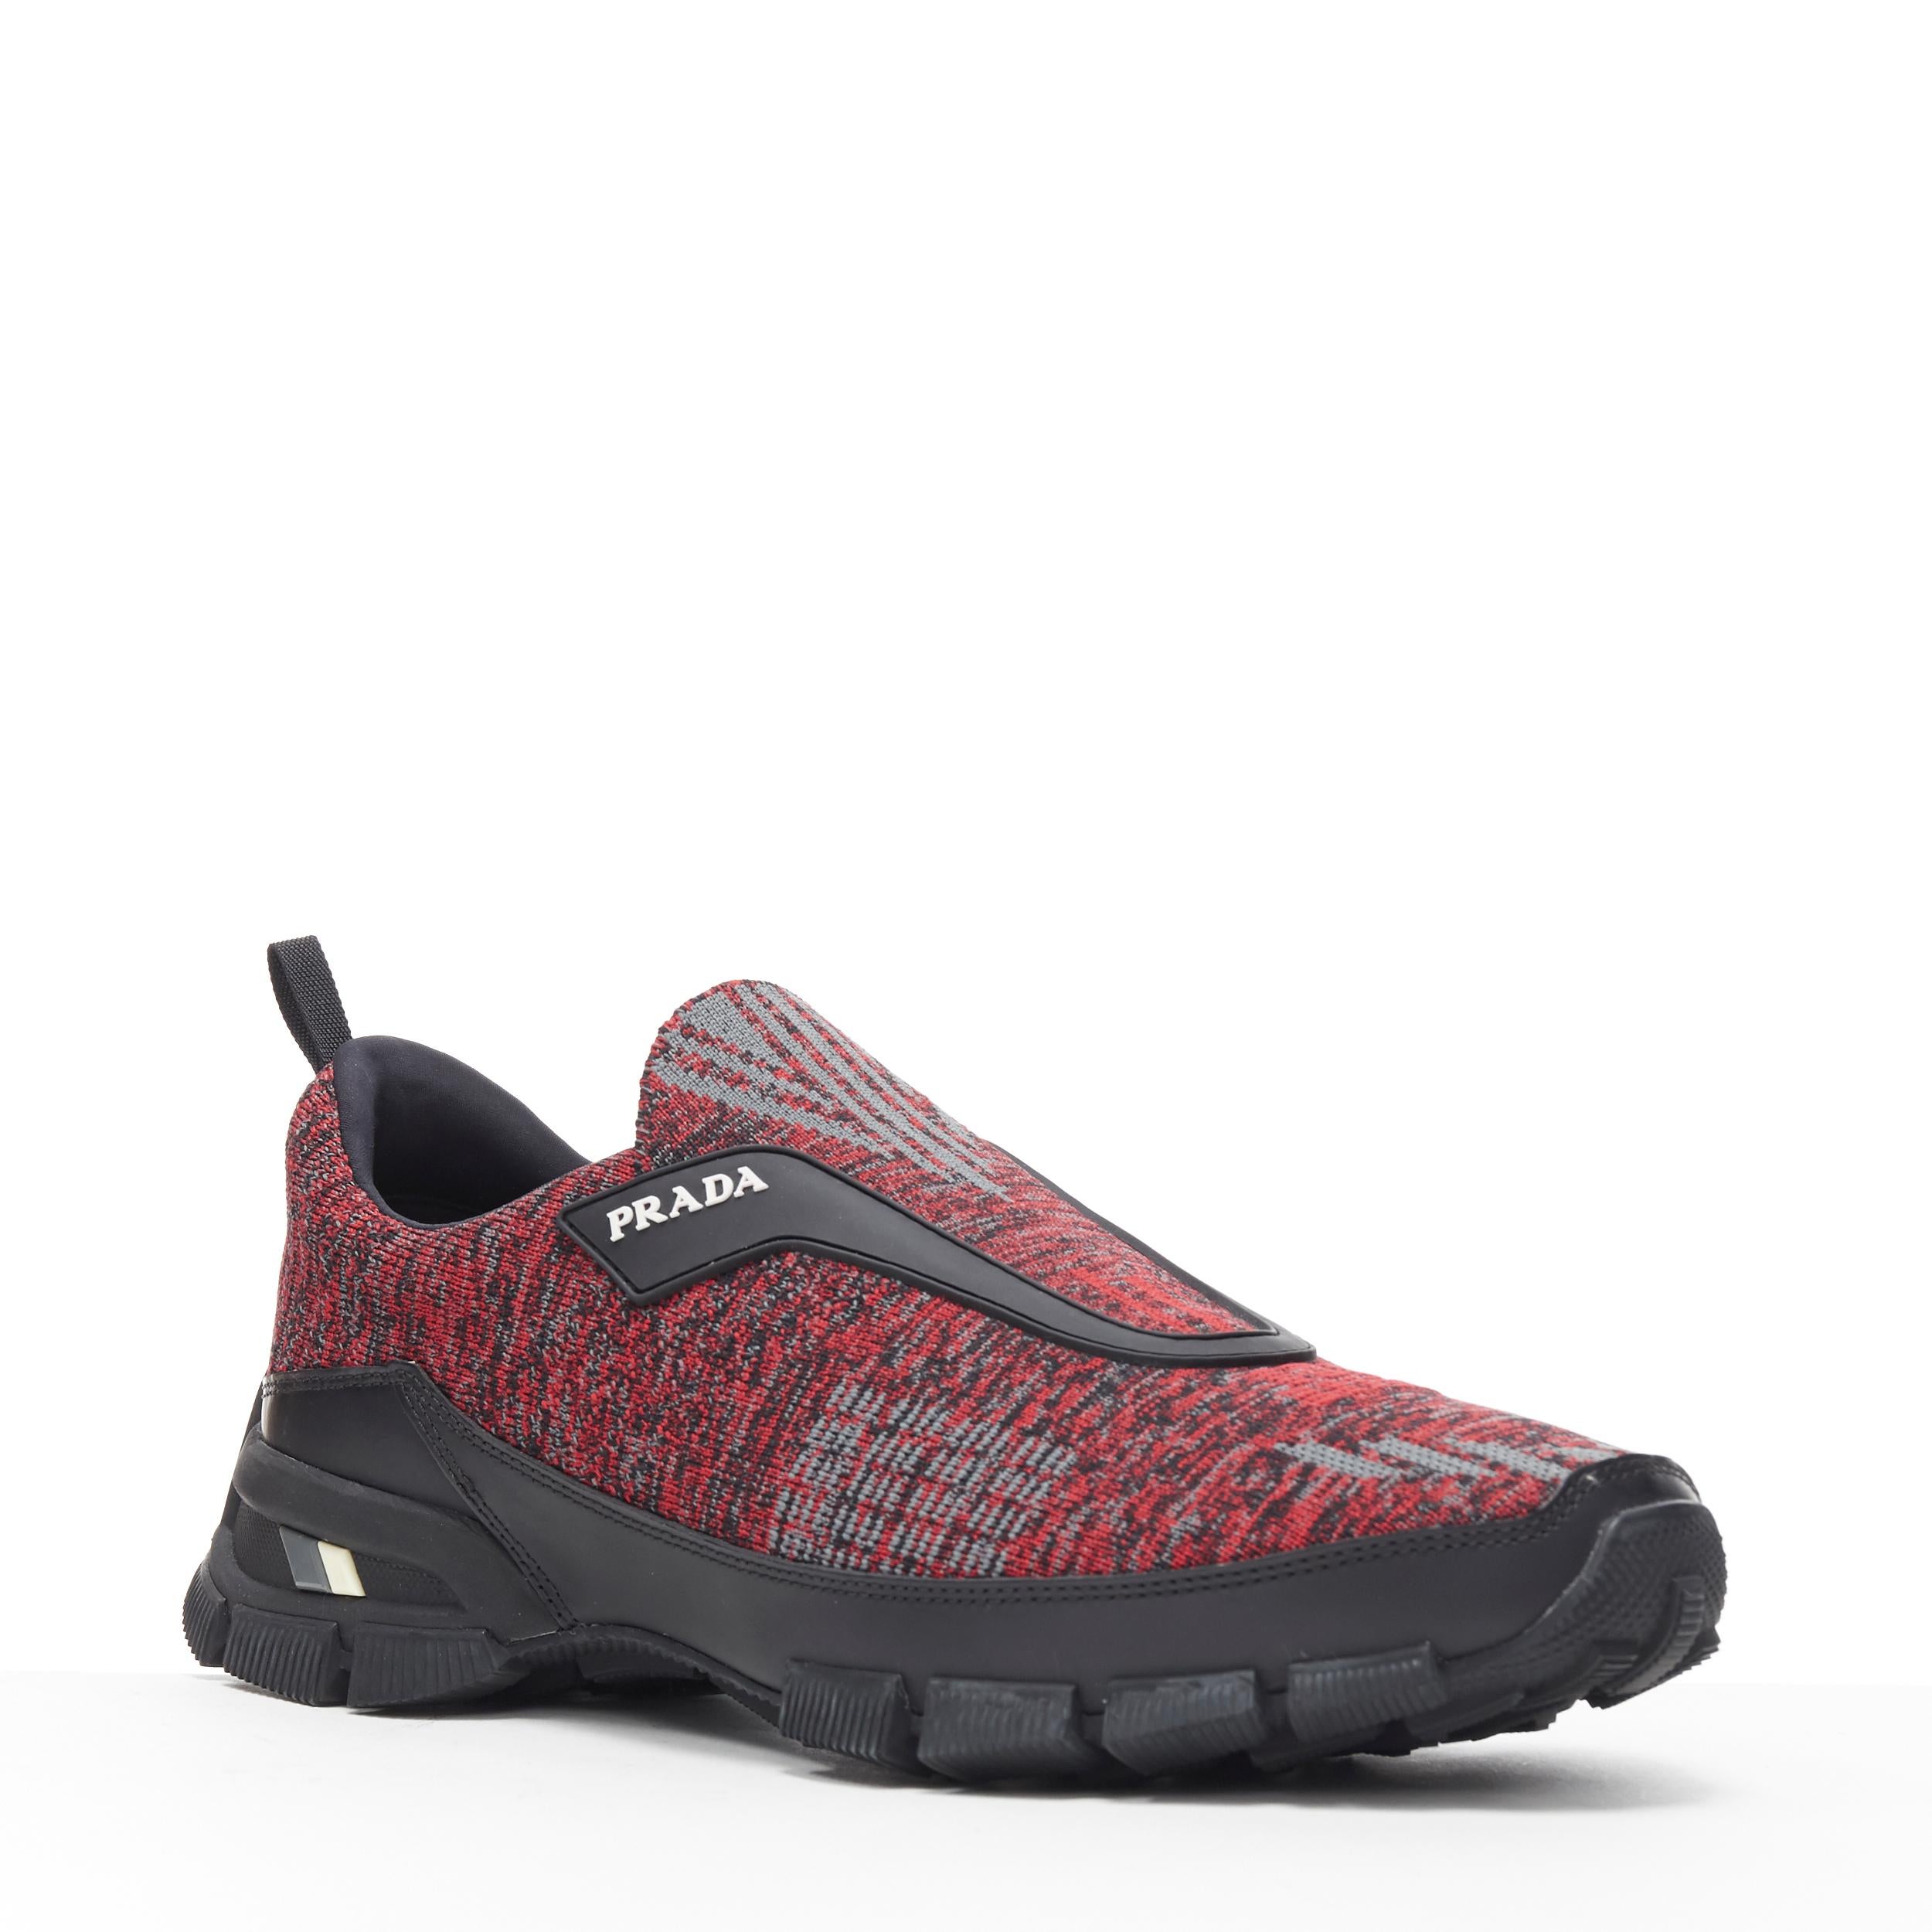 new PRADA Crossection Knit Low red black sock low runner sneakers UK6 US7 EU39 
Reference: TGAS/A05873 
Brand: Prada 
Designer: Miuccia Prada 
Model: Crossection 
Material: Fabric 
Color: Red 
Pattern: Solid 
Closure: Pull on 
Extra Detail: Red grey